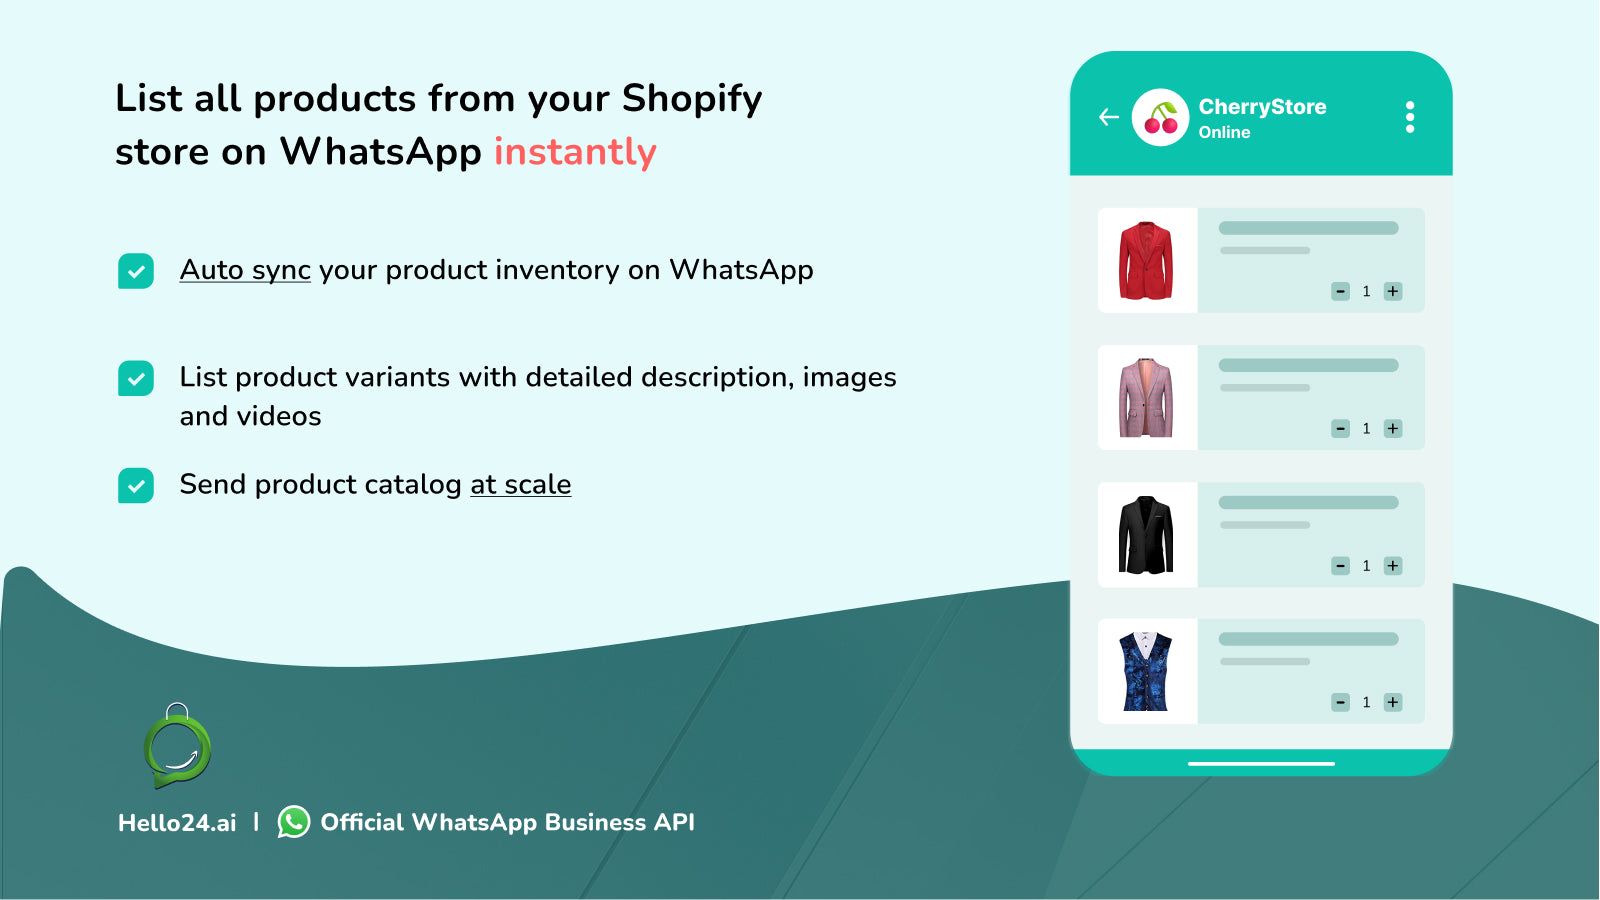 List all products from your Shopify store on WhatsApp instantly